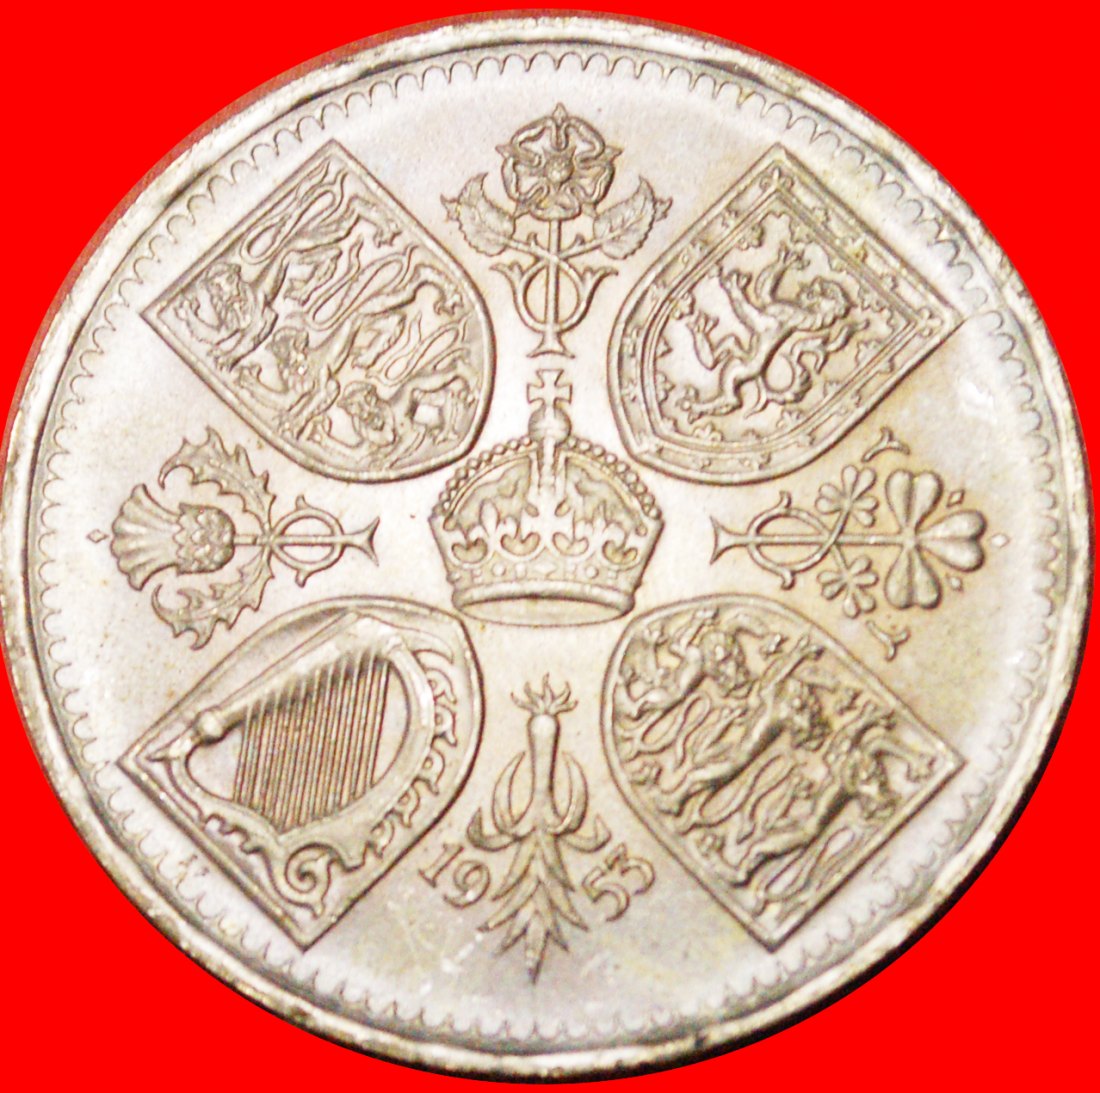  # CORONATION CROWN: GREAT BRITAIN ★ 5 SHILLINGS 1953 UNC MINT LUSTER! LOW START ★ NO RESERVE!   